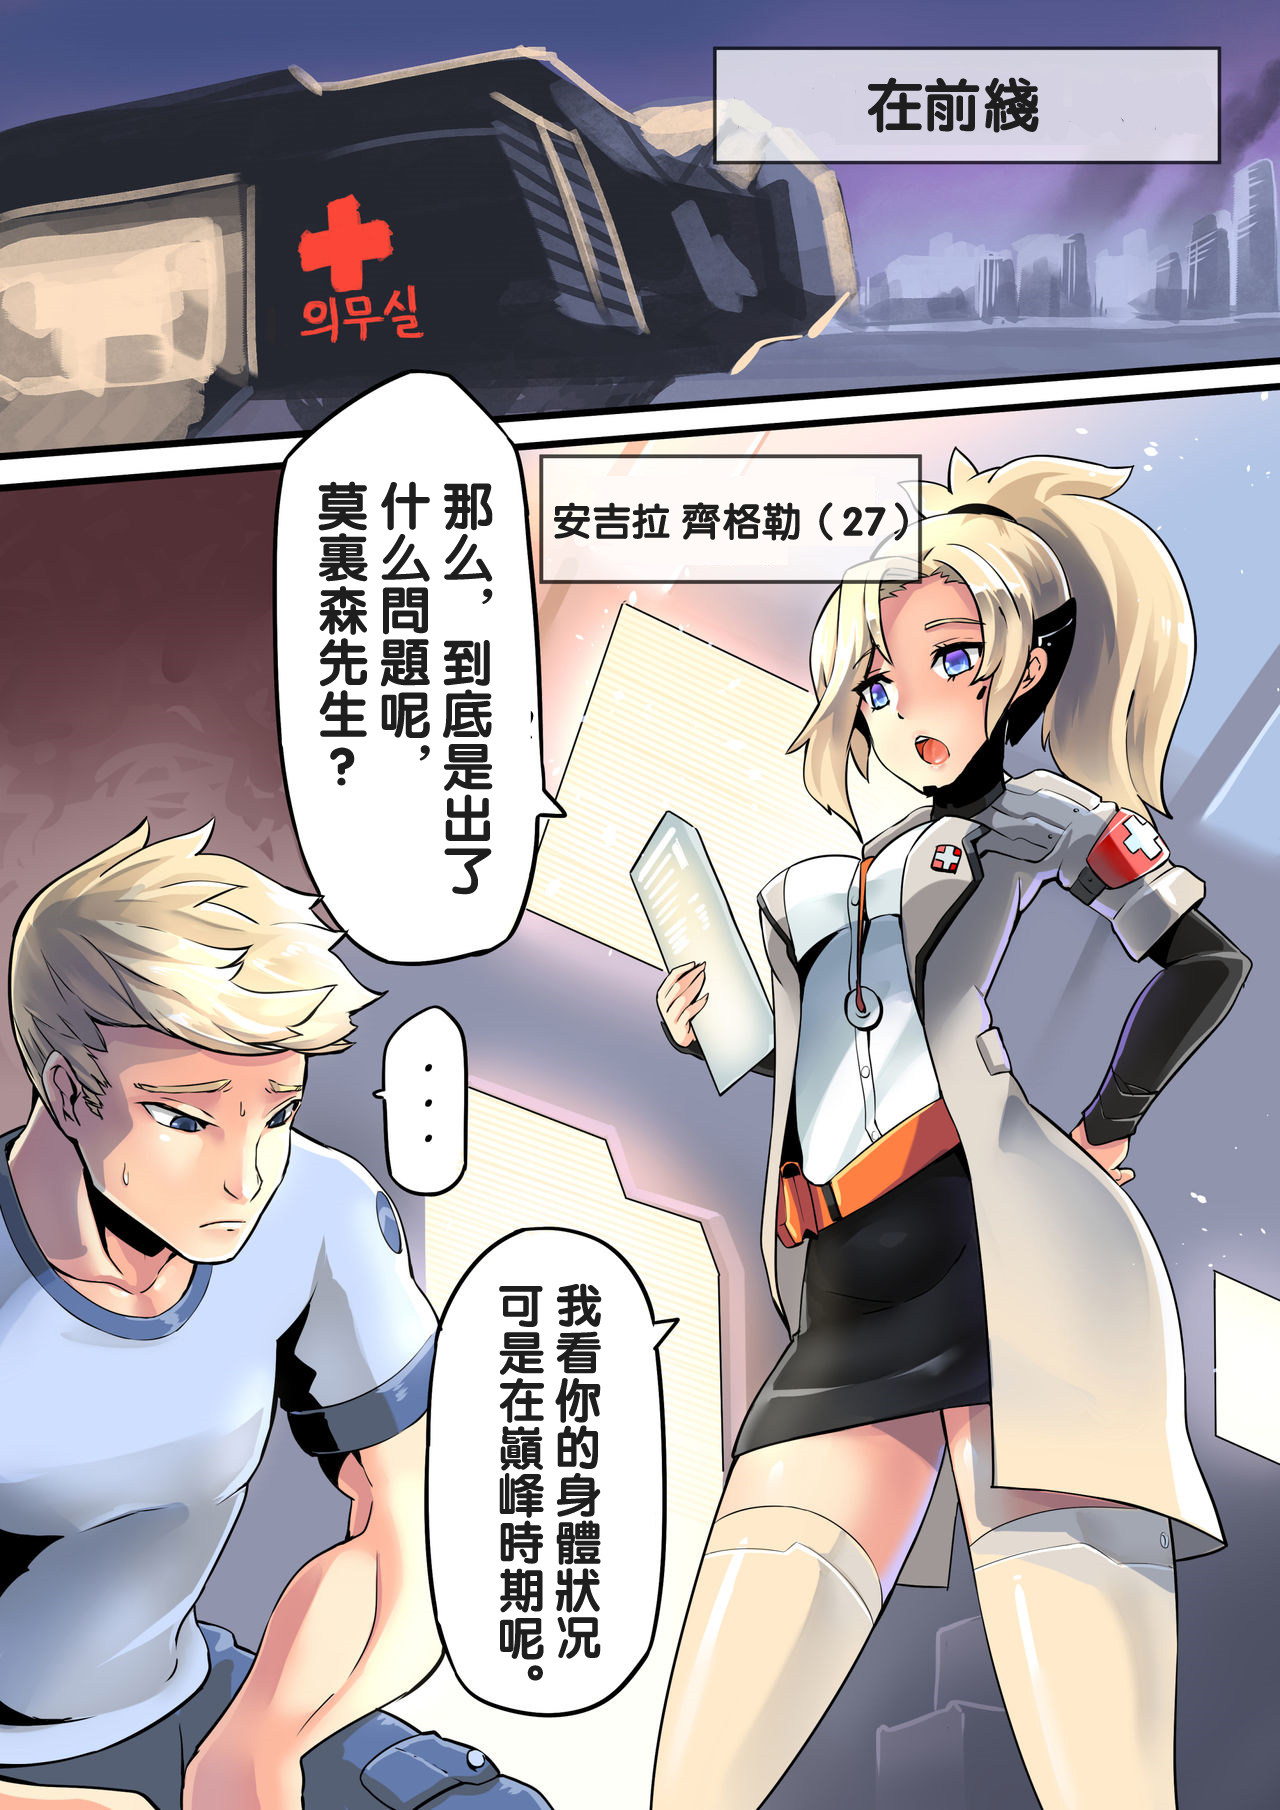 [HM] Mercy Therapy (Overwatch) [Chinese] [沒有漢化] 